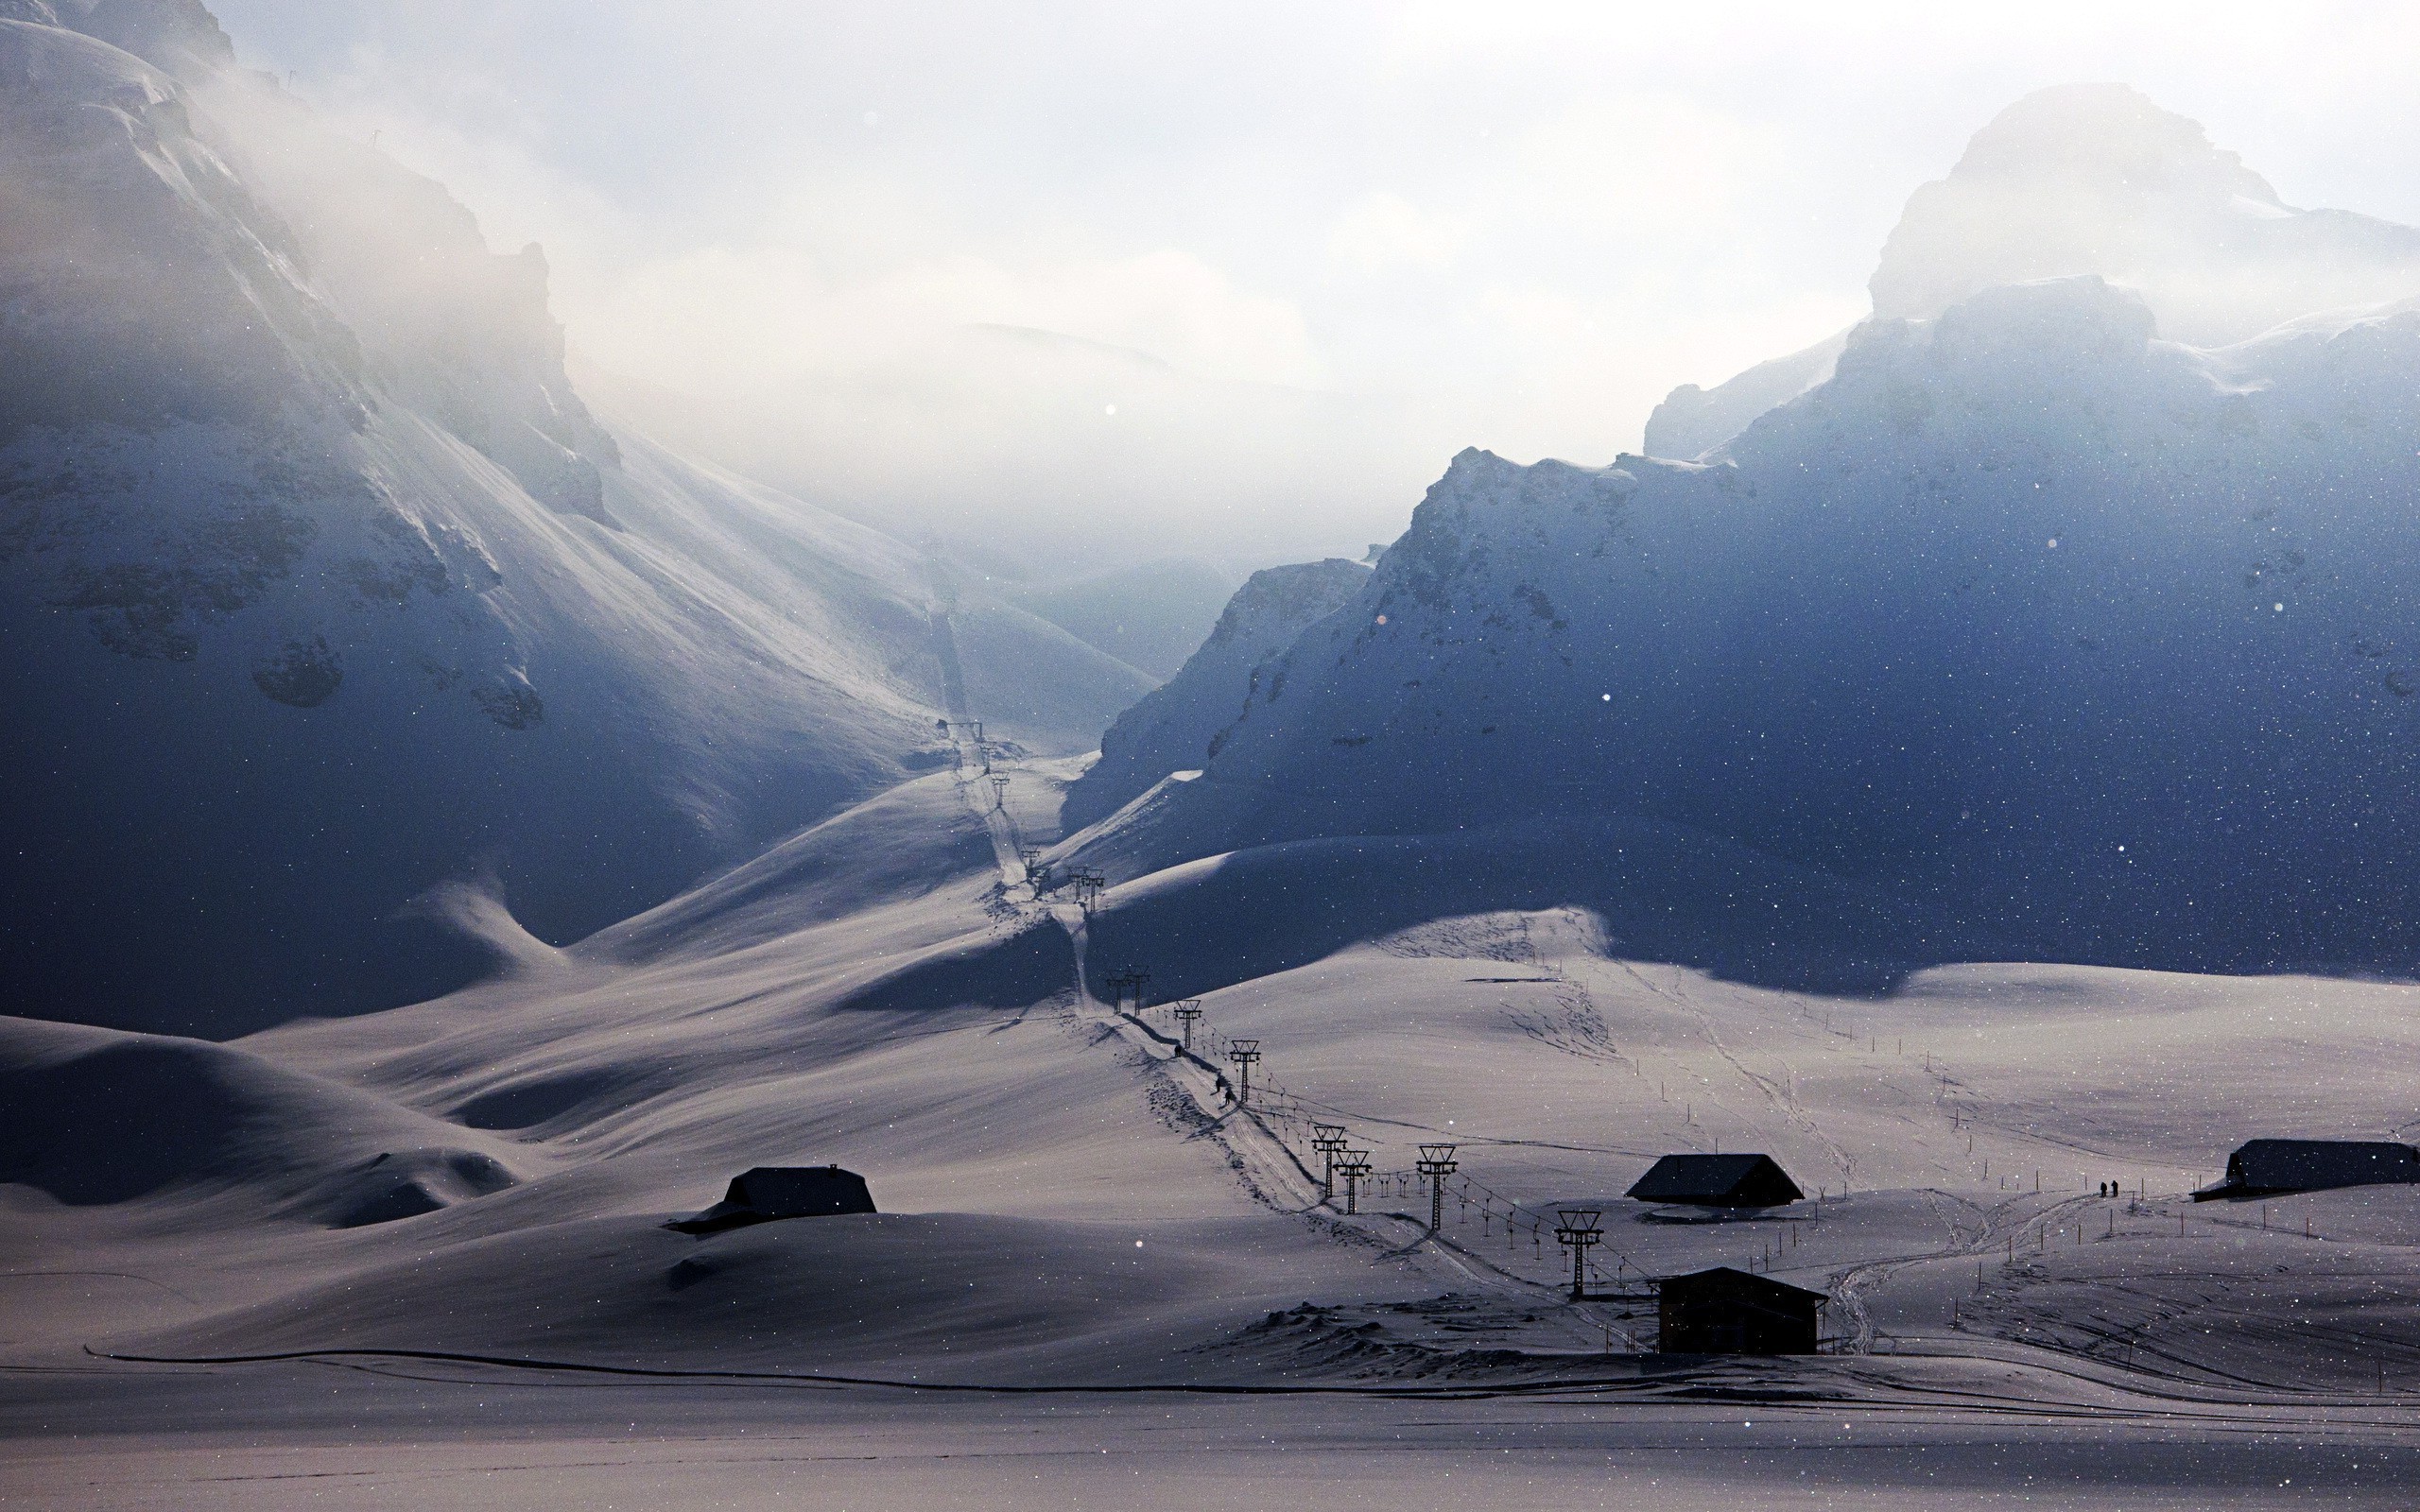 photography, Landscape, Nature, Winter, Snow, Cable Cars, House, Skiing, Ski Lifts, Ski Lift, Mountain Wallpaper